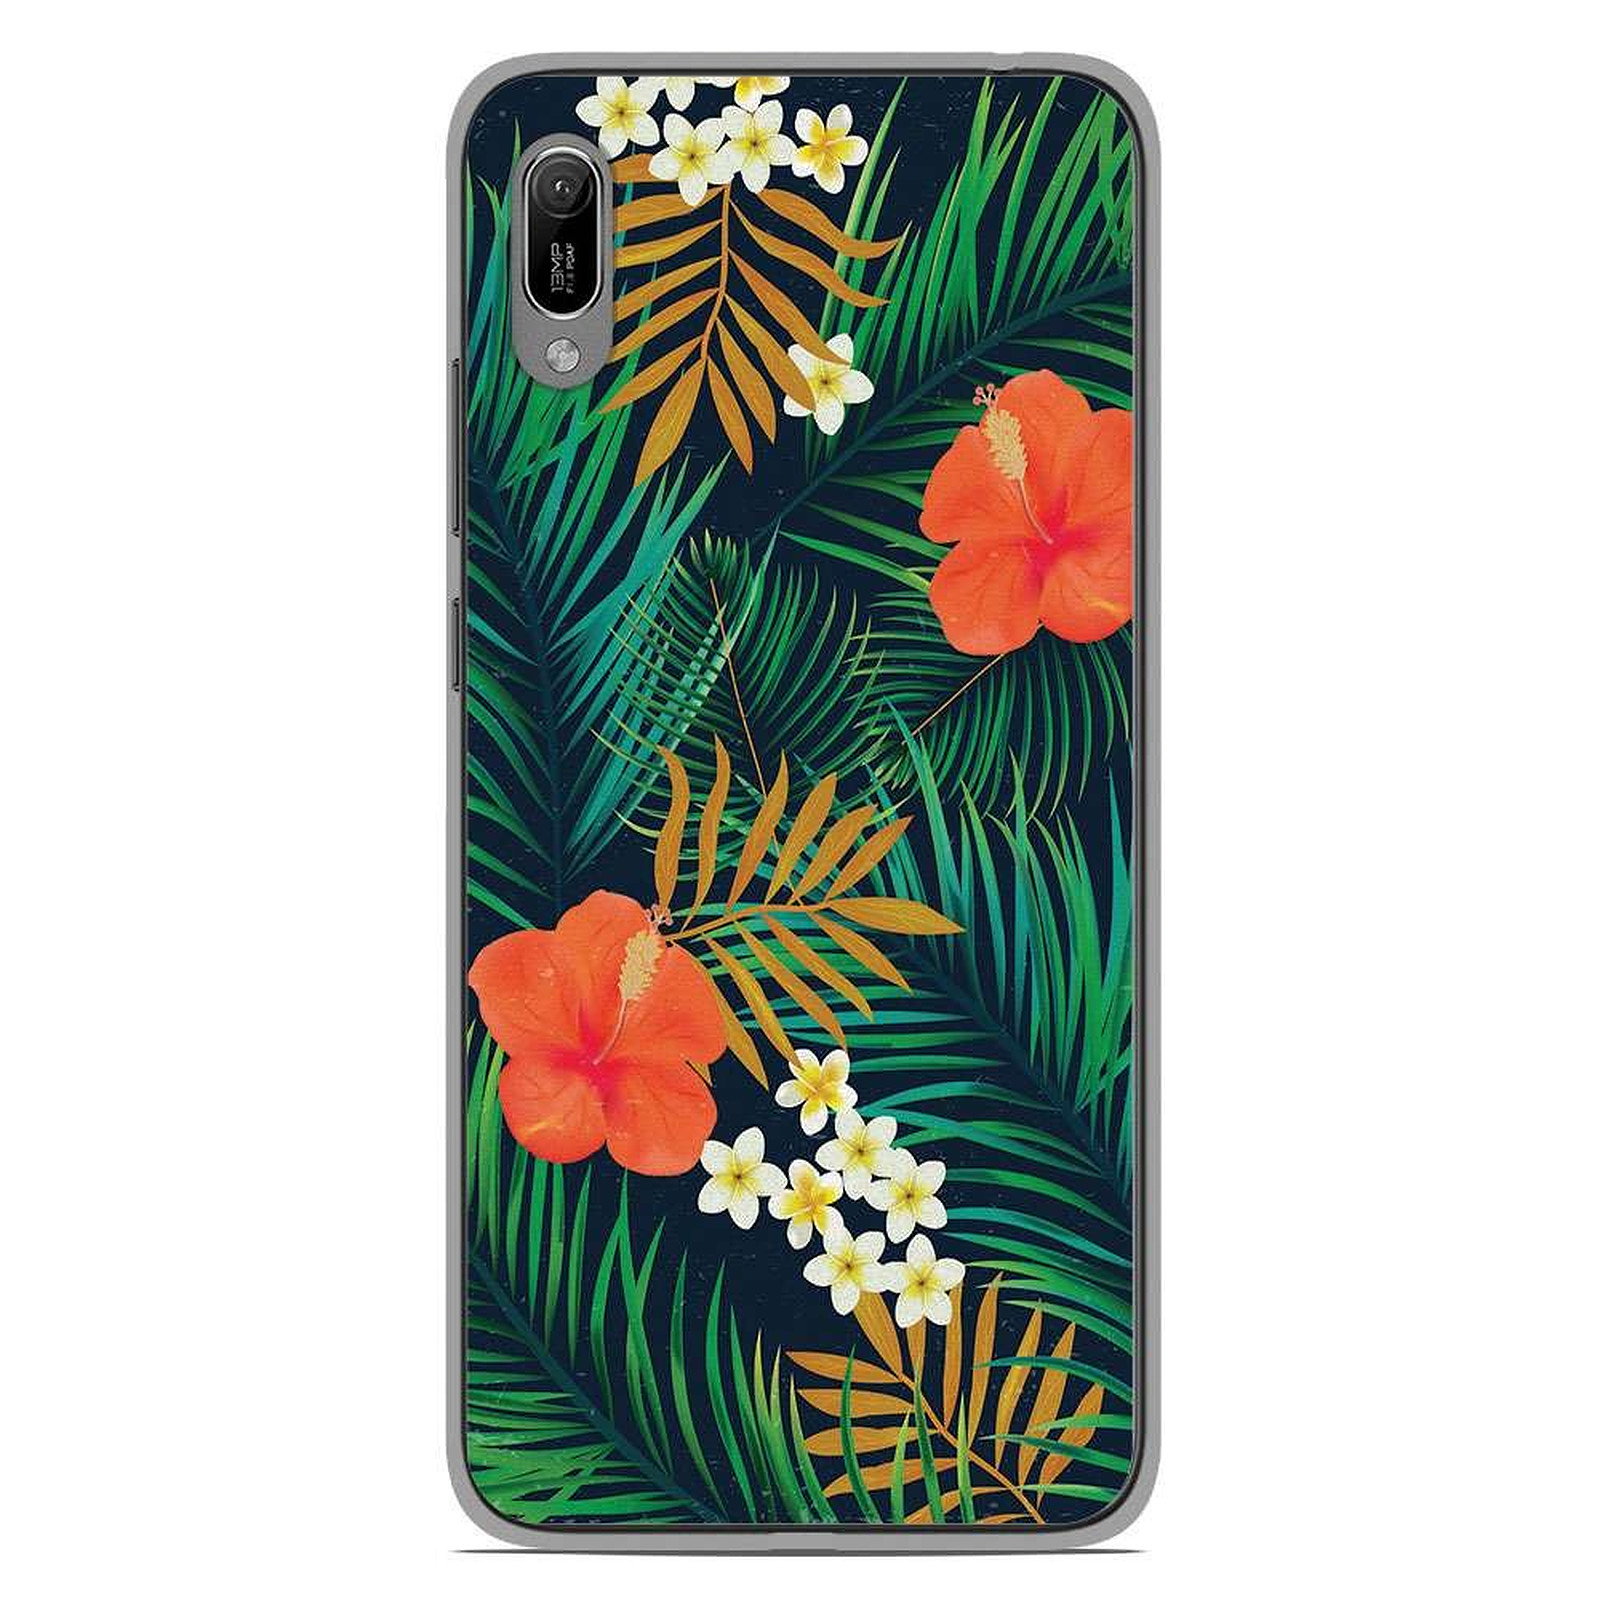 1001 Coques Coque silicone gel Huawei Y6 2019 motif Tropical - Coque telephone 1001Coques